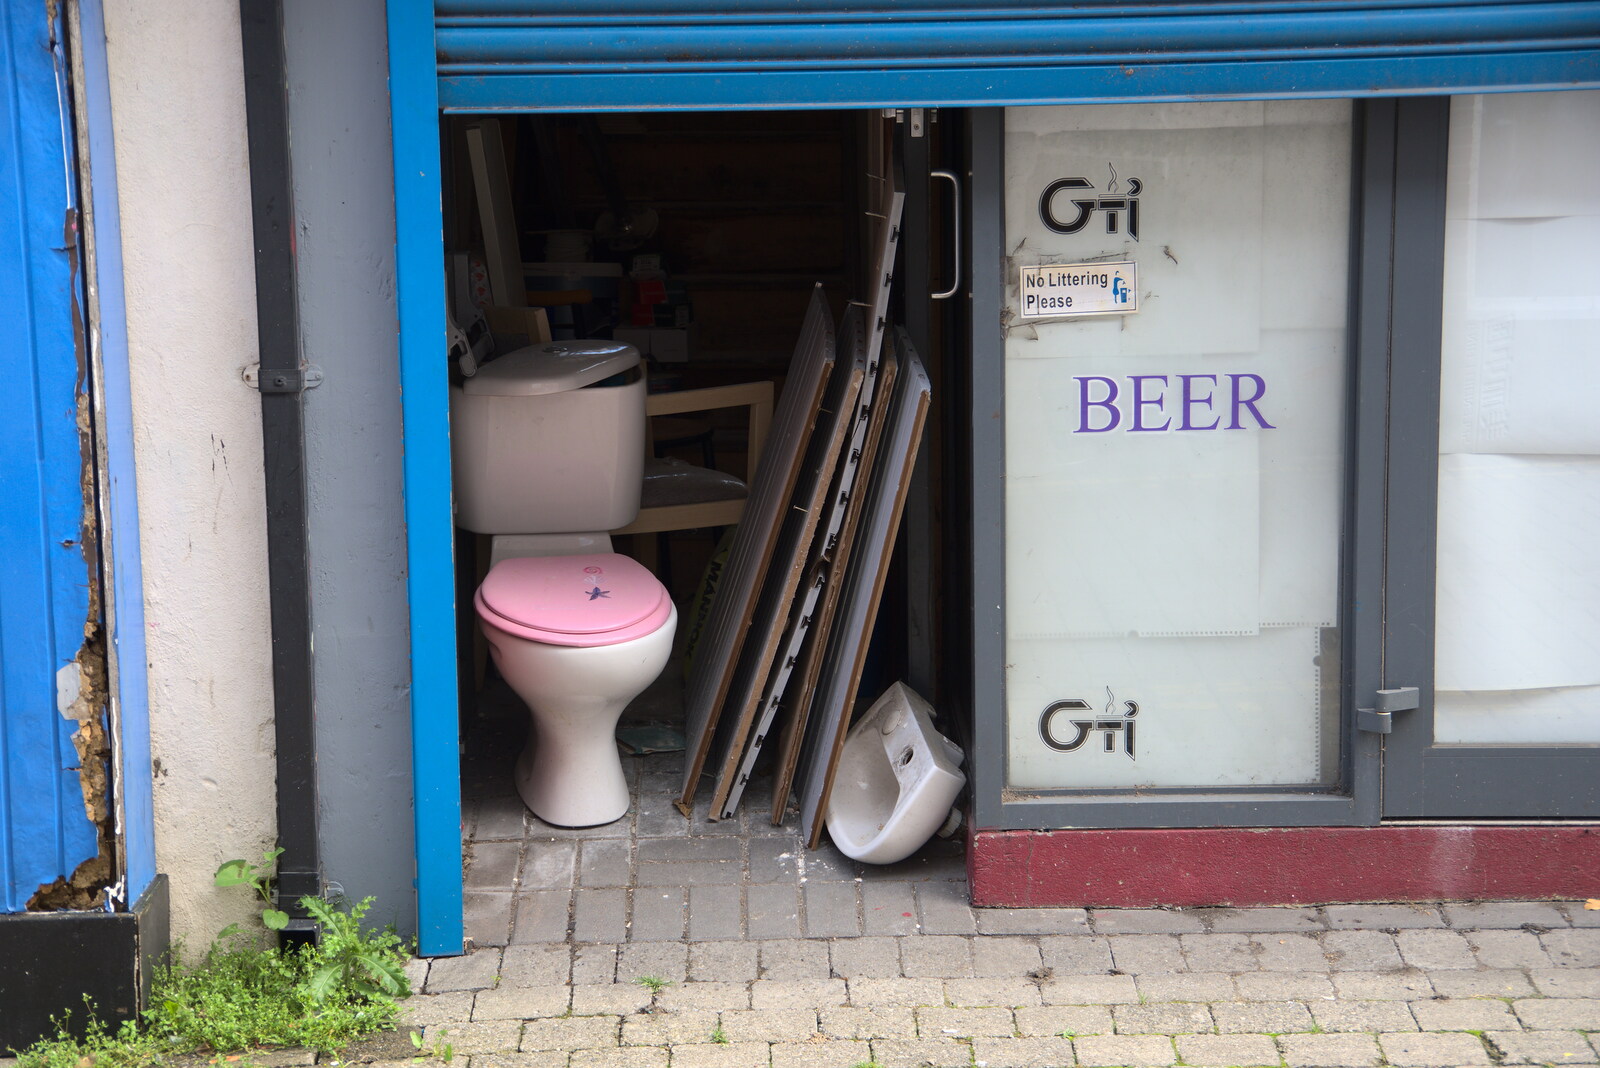 A random toilet from Manorhamilton and the Street Art of Dún Laoghaire, Ireland - 15th August 2021